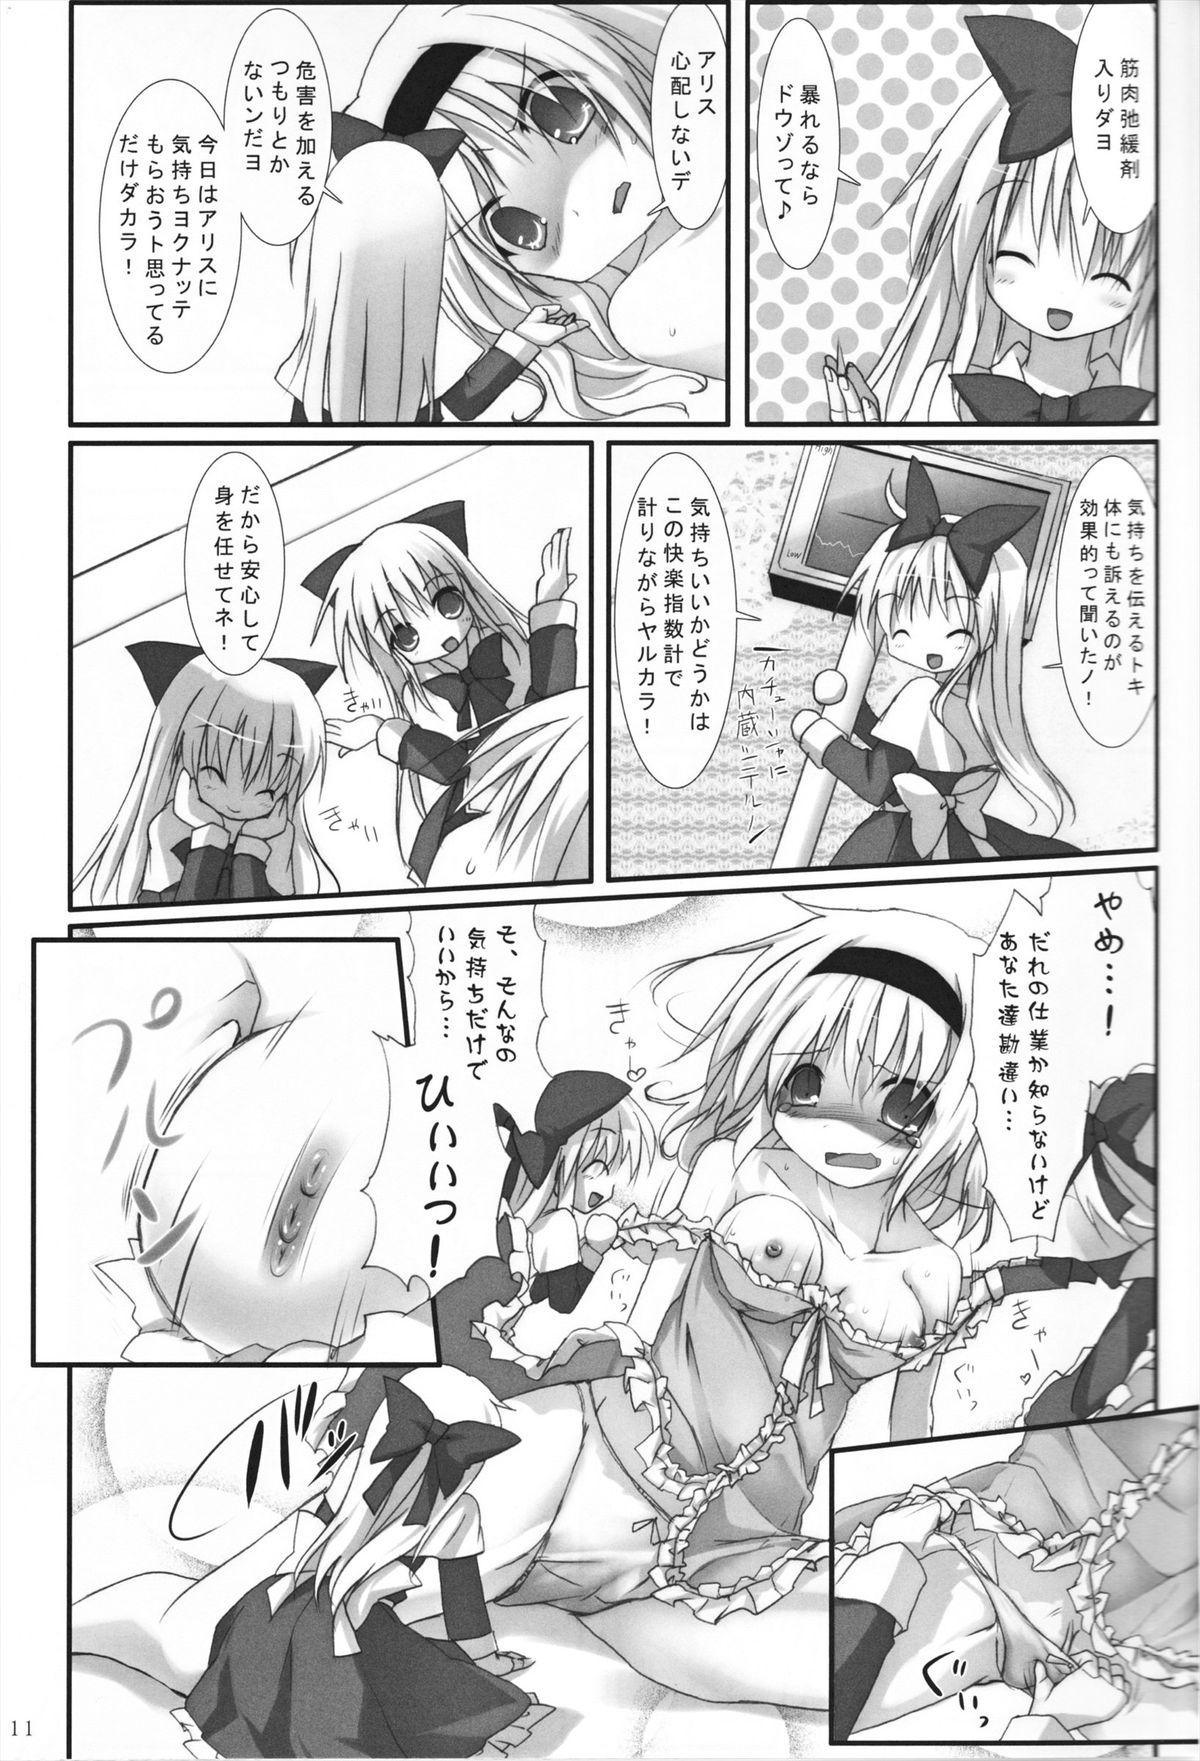 Small Tits Alice in Nightmare - Touhou project Monster - Page 11